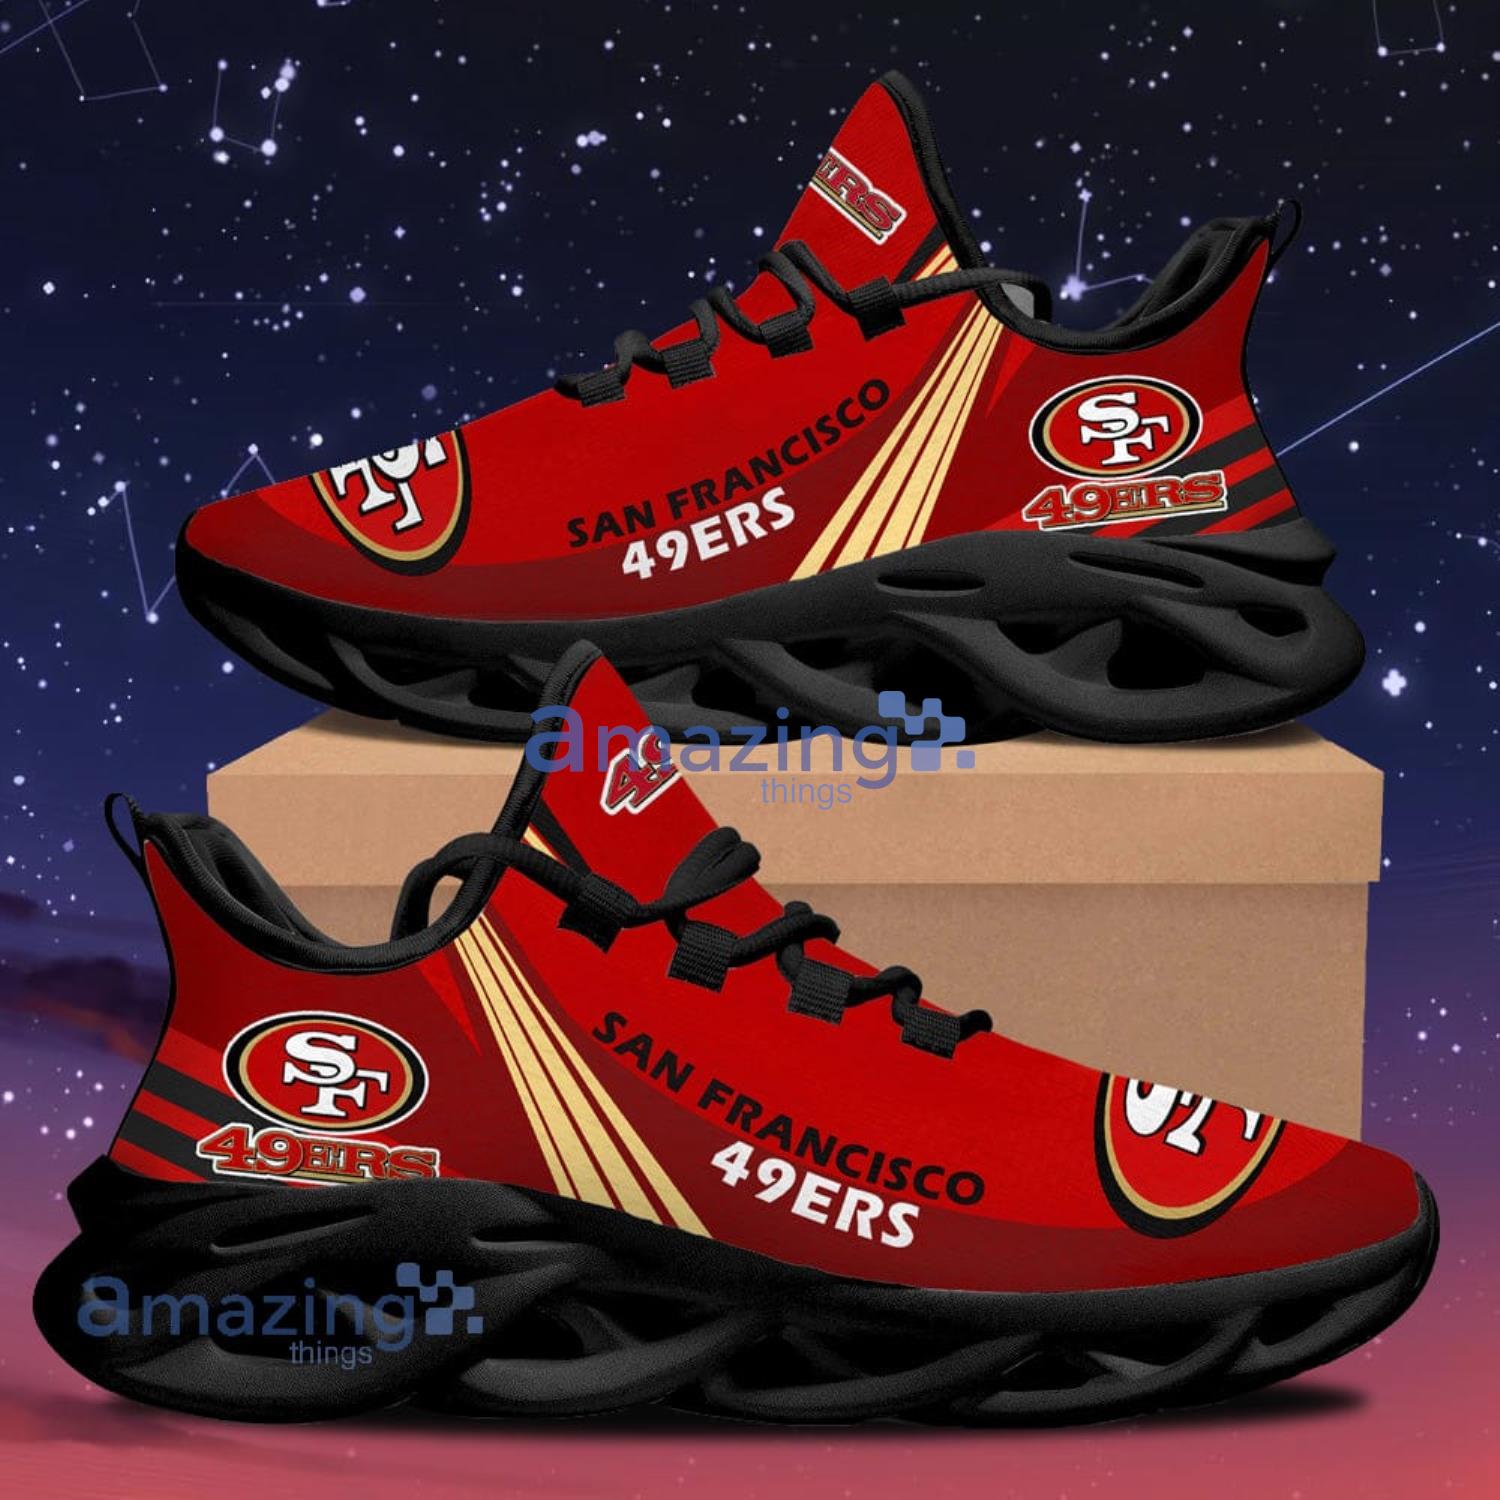 San Francisco 49ers New Trend Max Soul Shoes Running Sneakers Product Photo 1